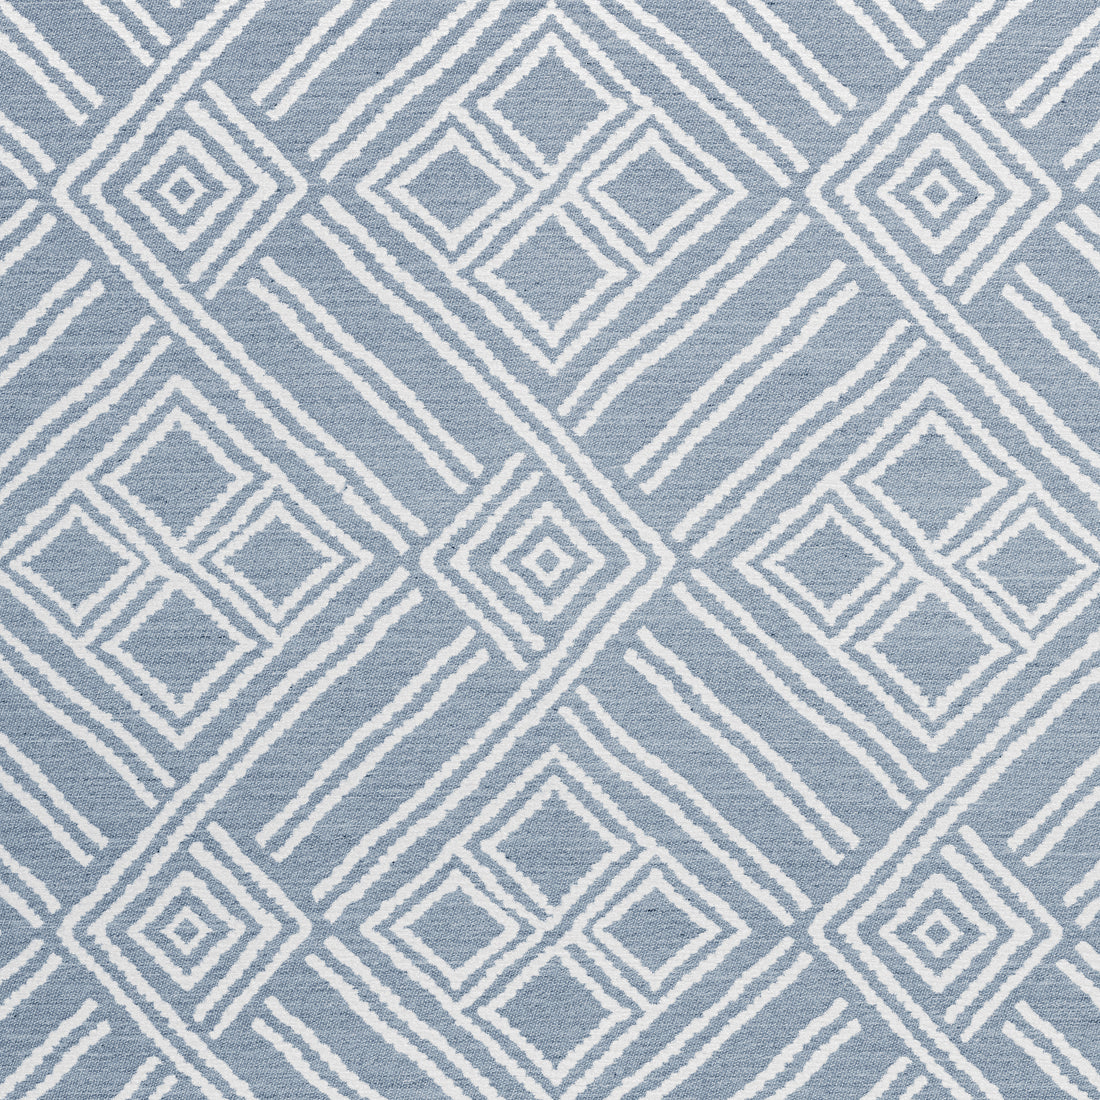 Terraza fabric in horizon color - pattern number W8609 - by Thibaut in the Villa collection